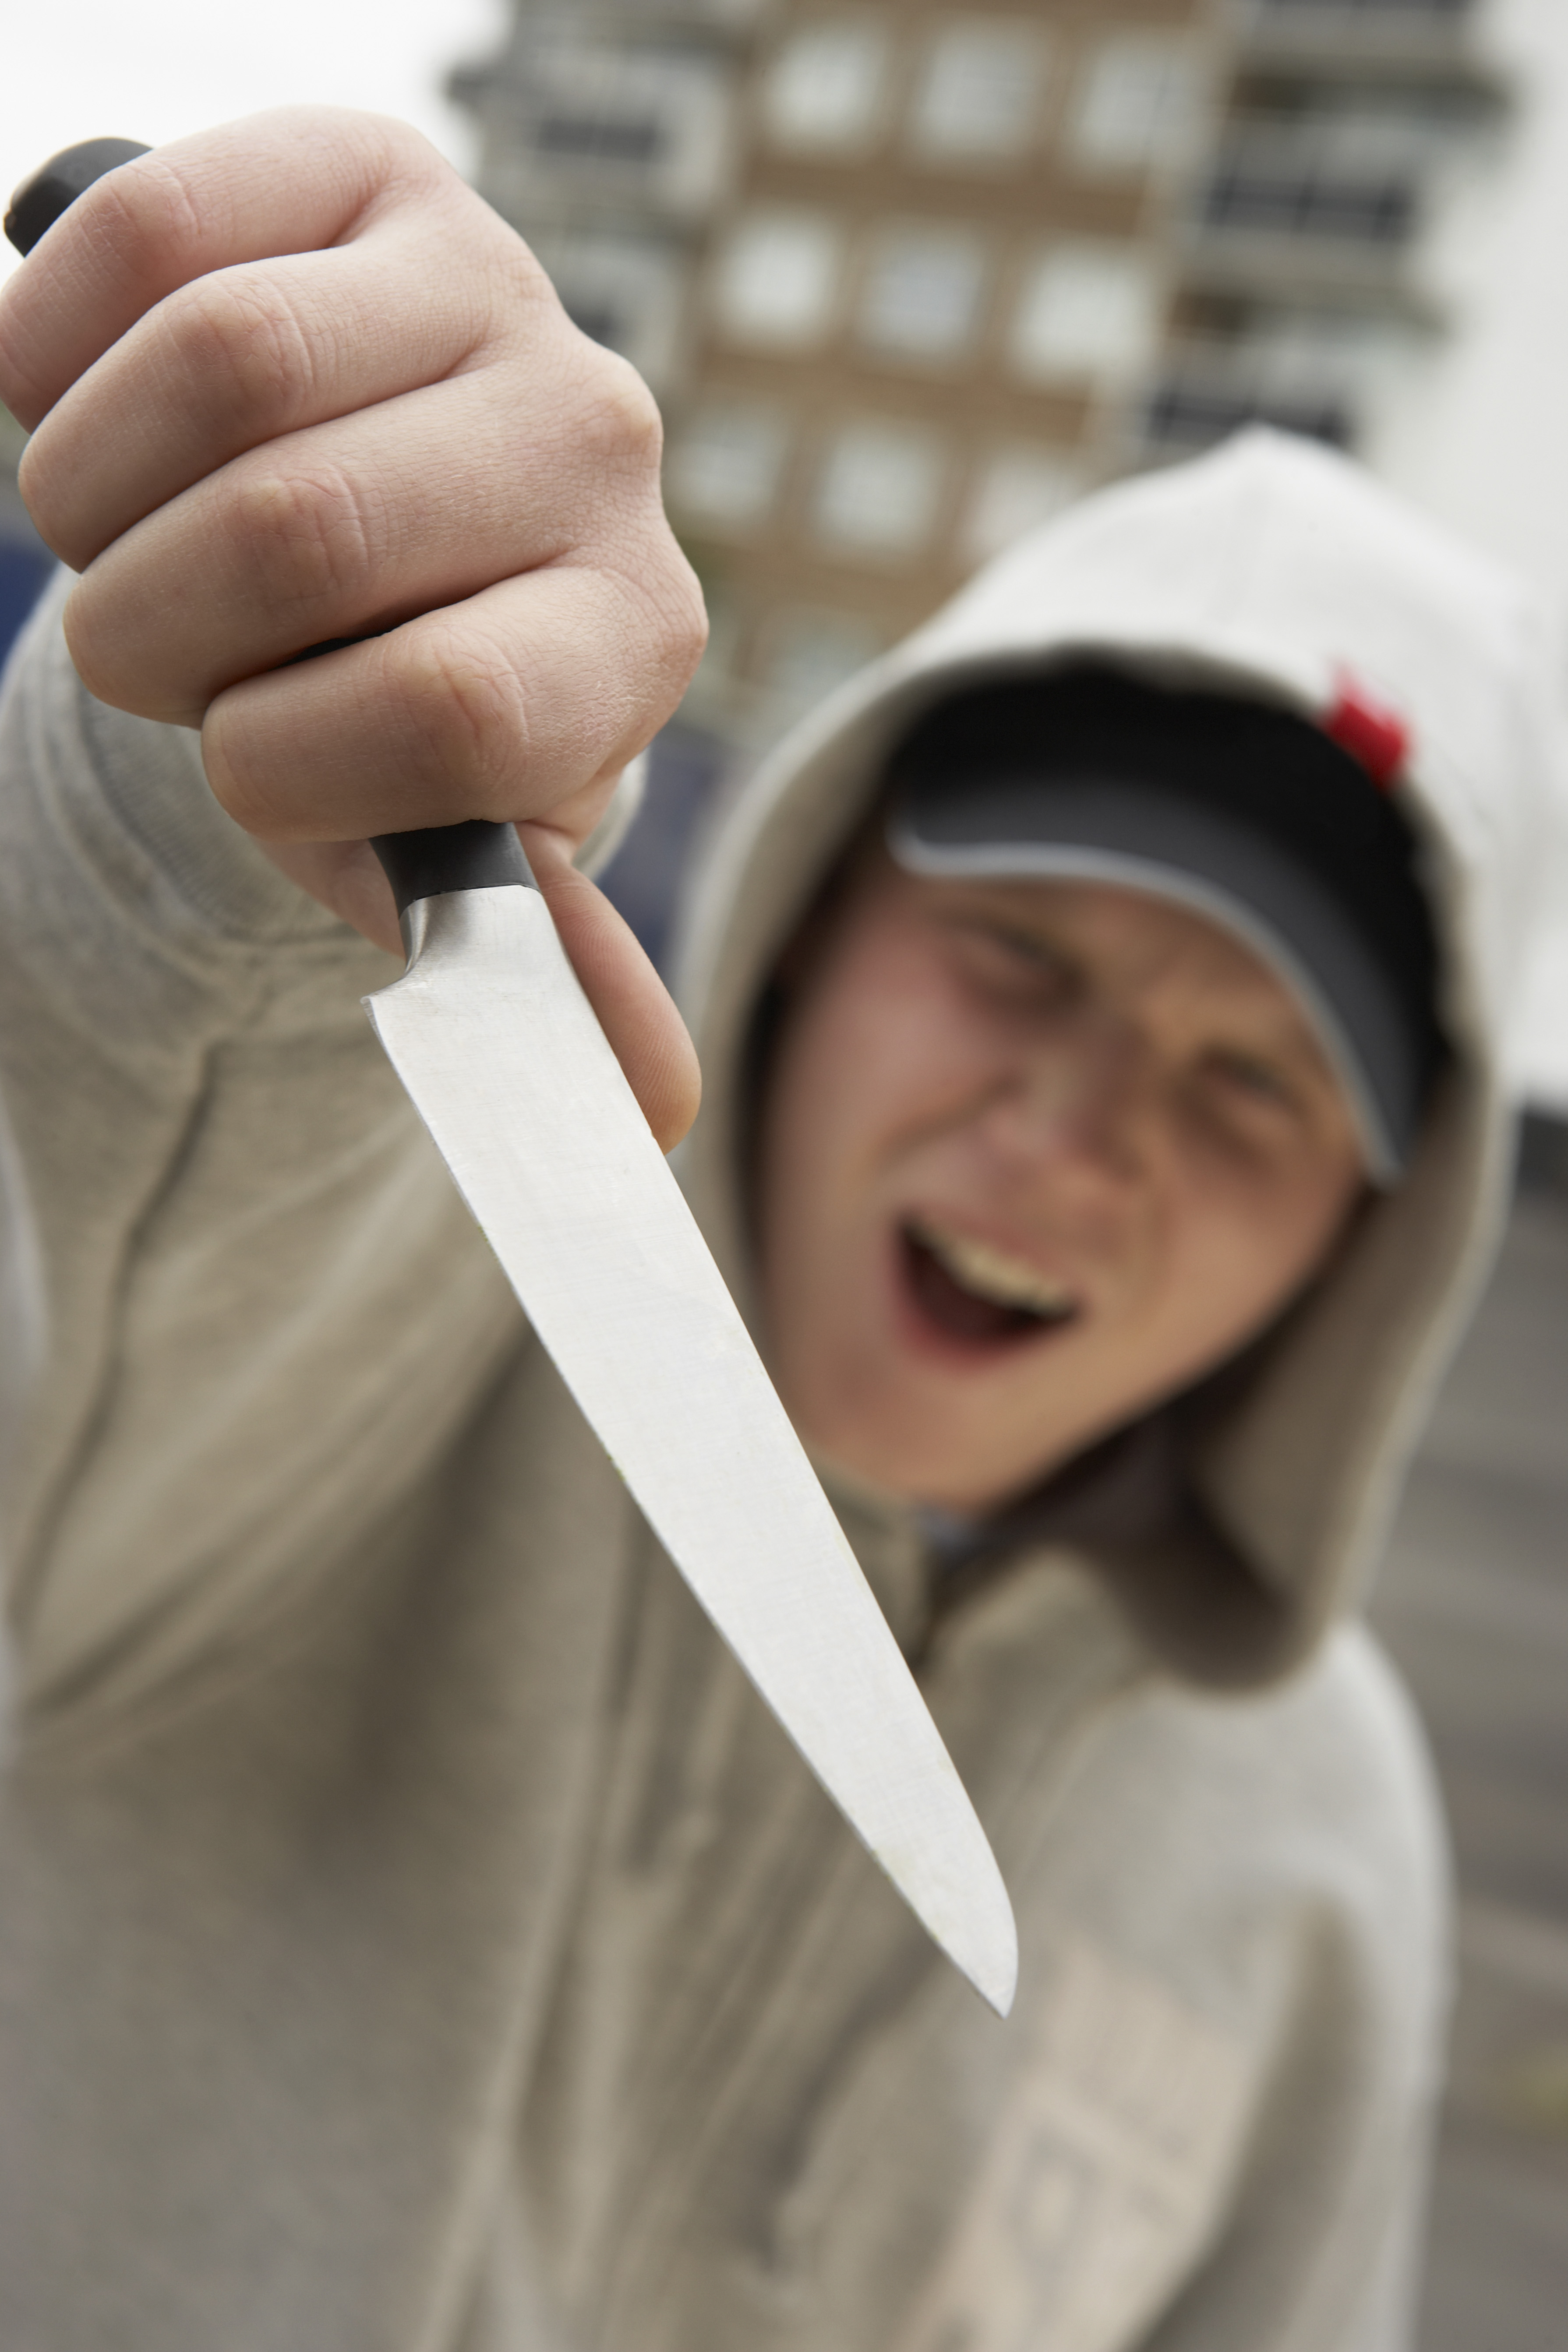 white youth holding knife in threatening way